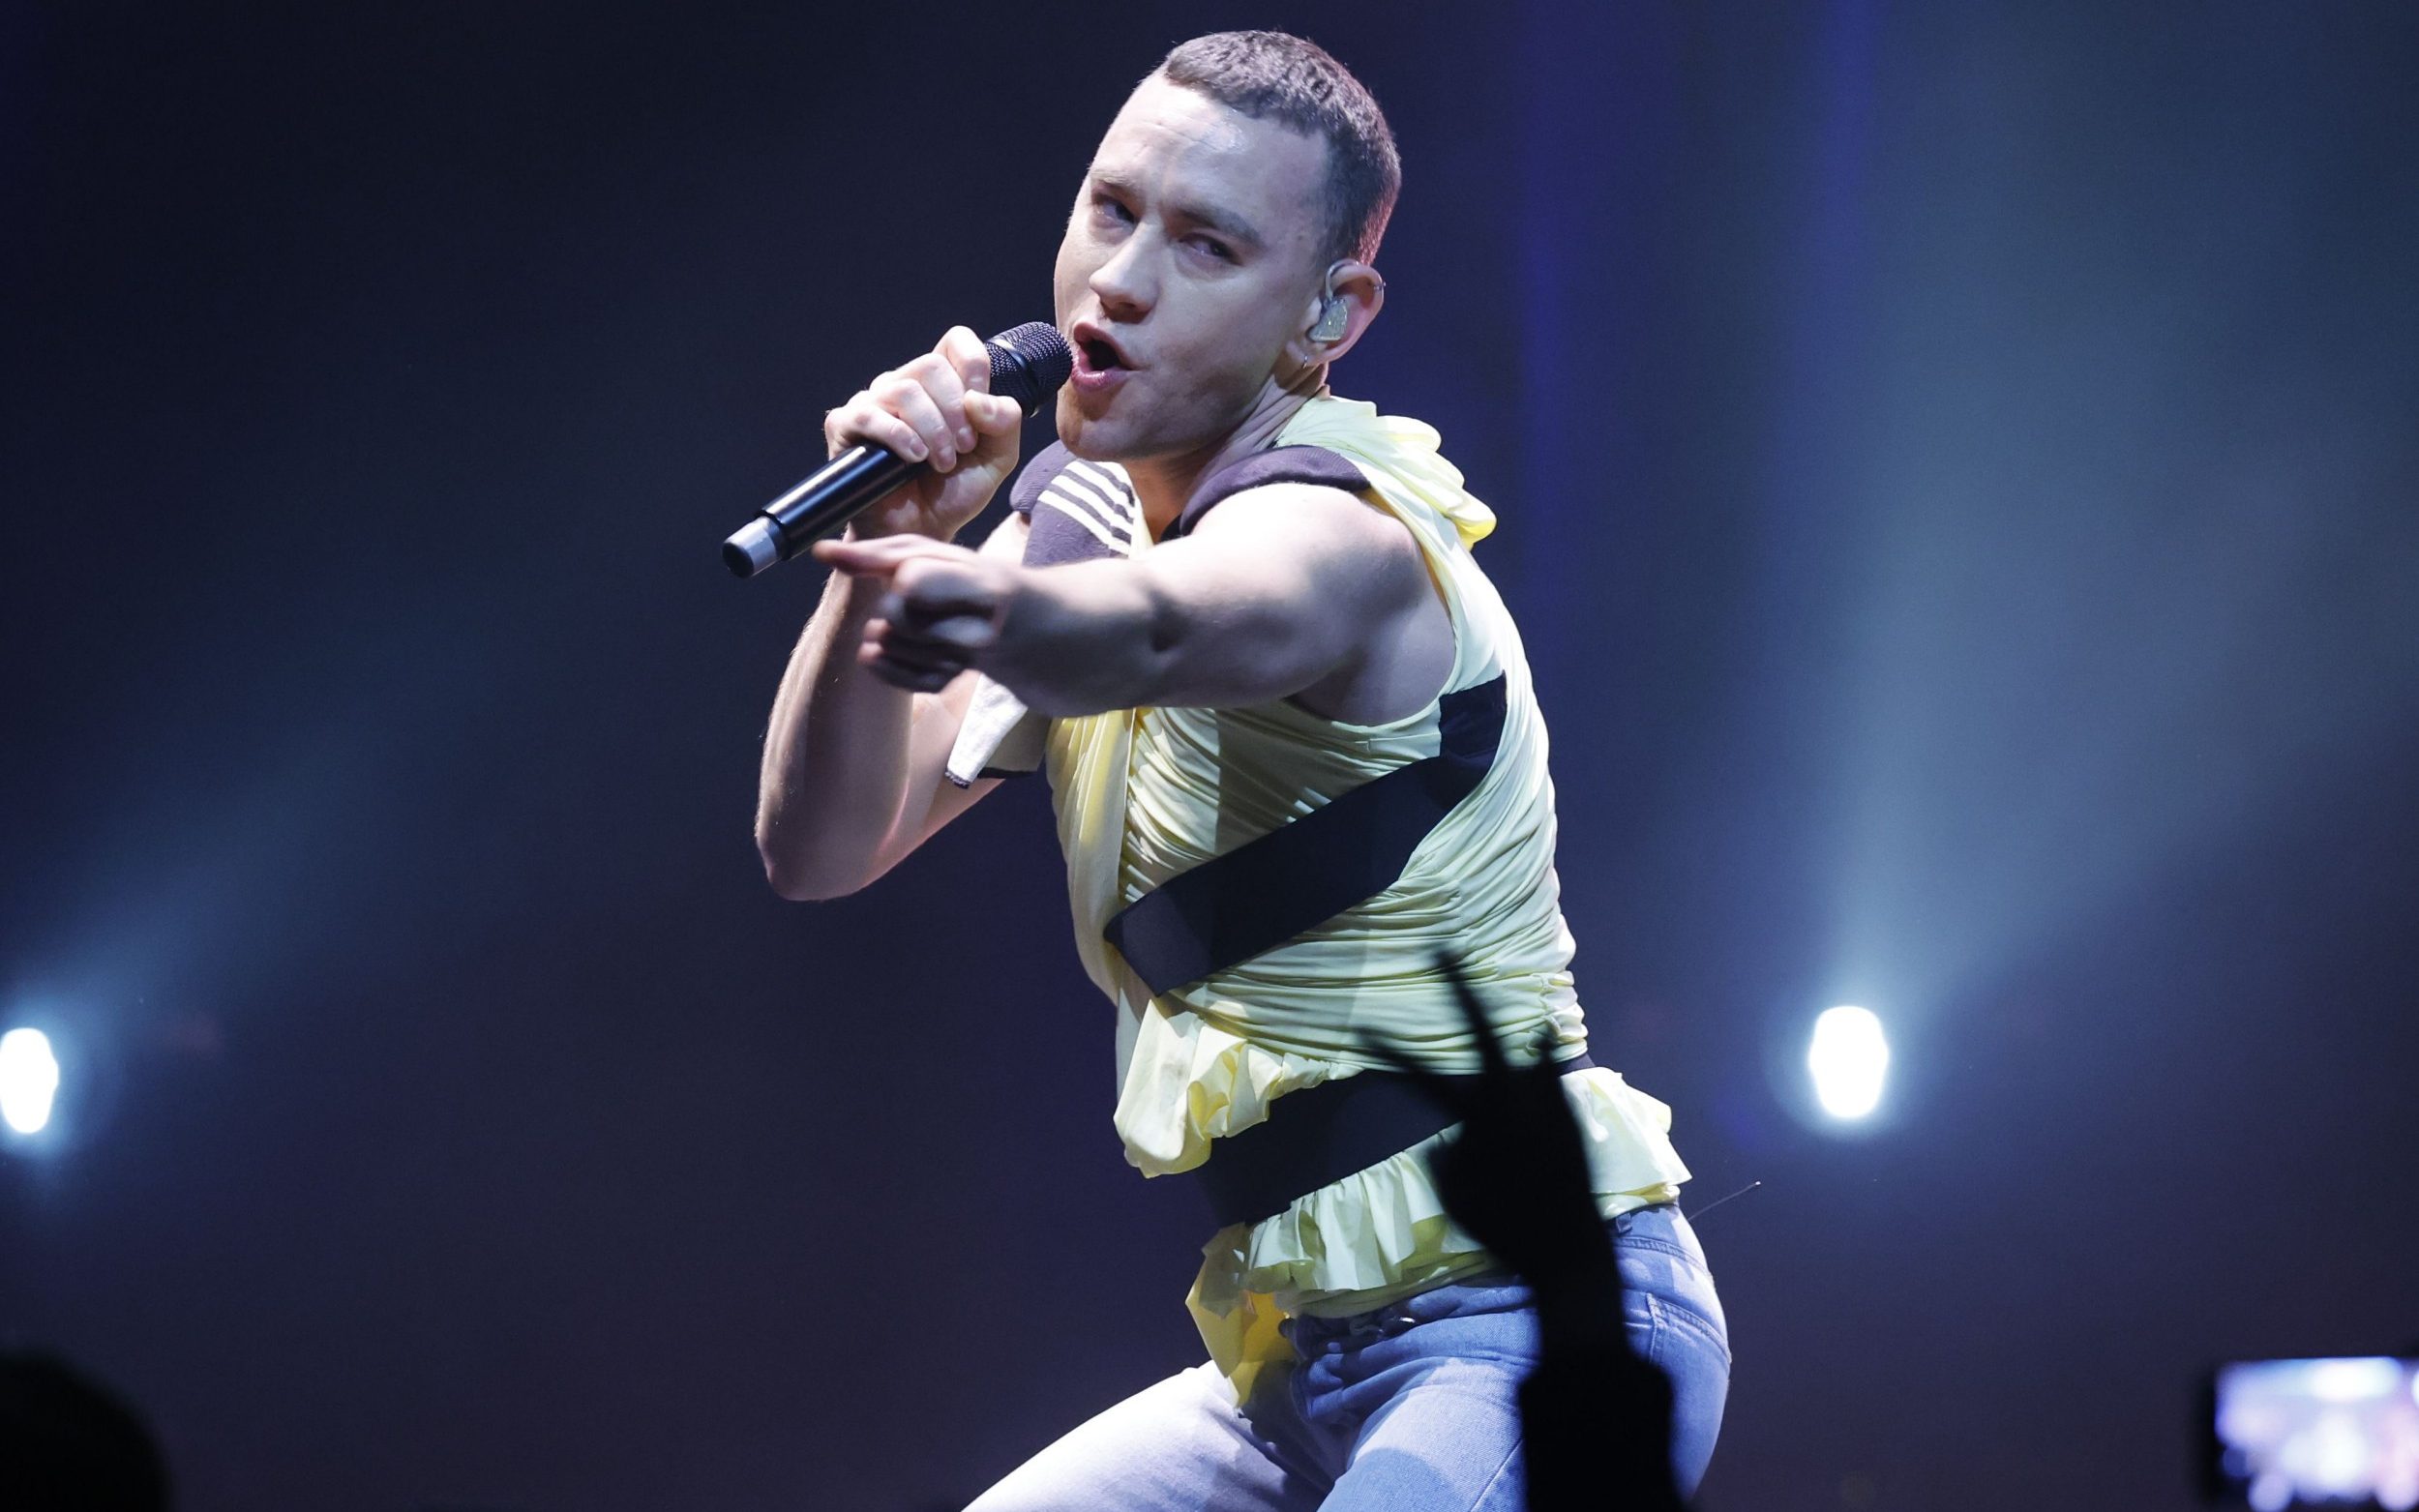 israeli eurovision contestant ‘must not leave hotel room’ amid safety fears